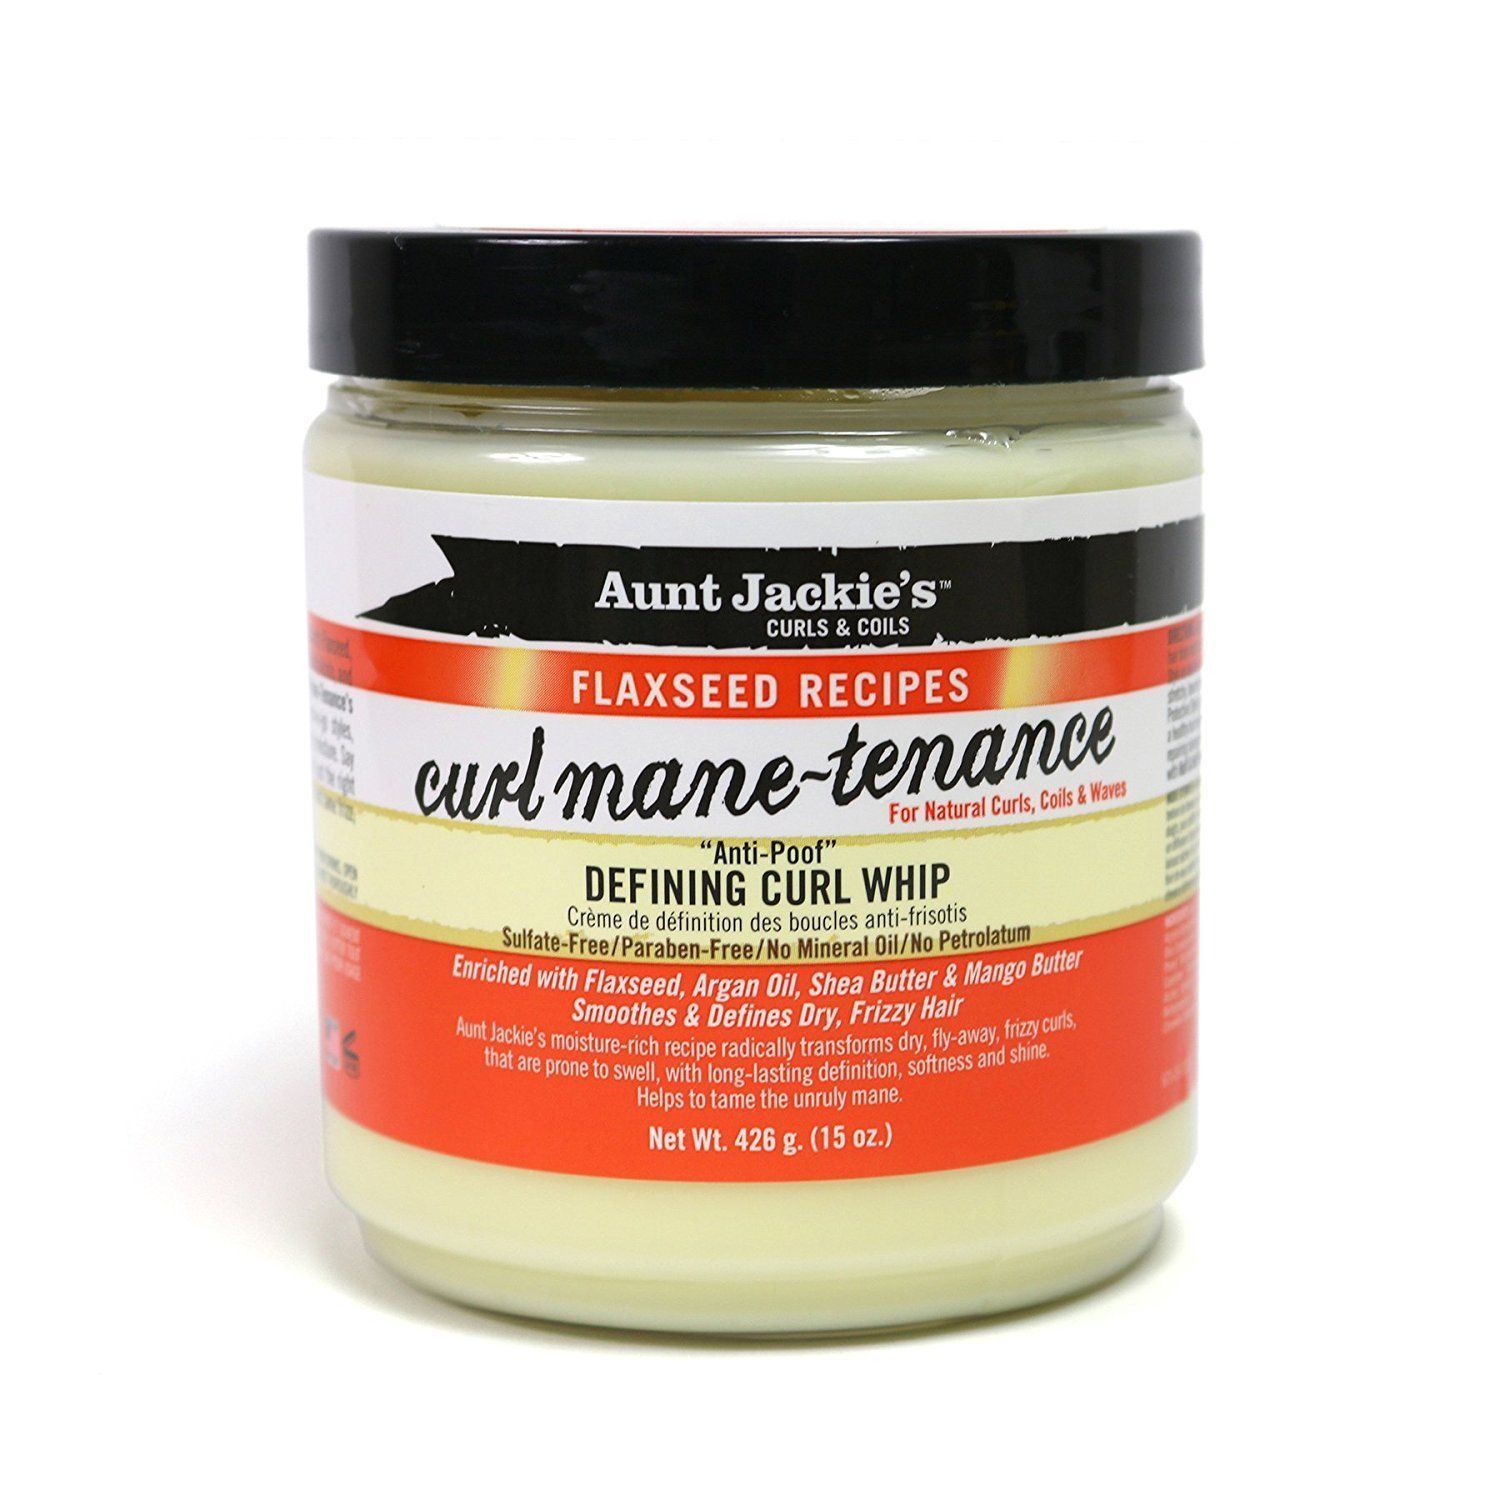 Aunt Jackie's Flaxseed Recipes Curl Mane-tenance Defining Curl Whip 15oz